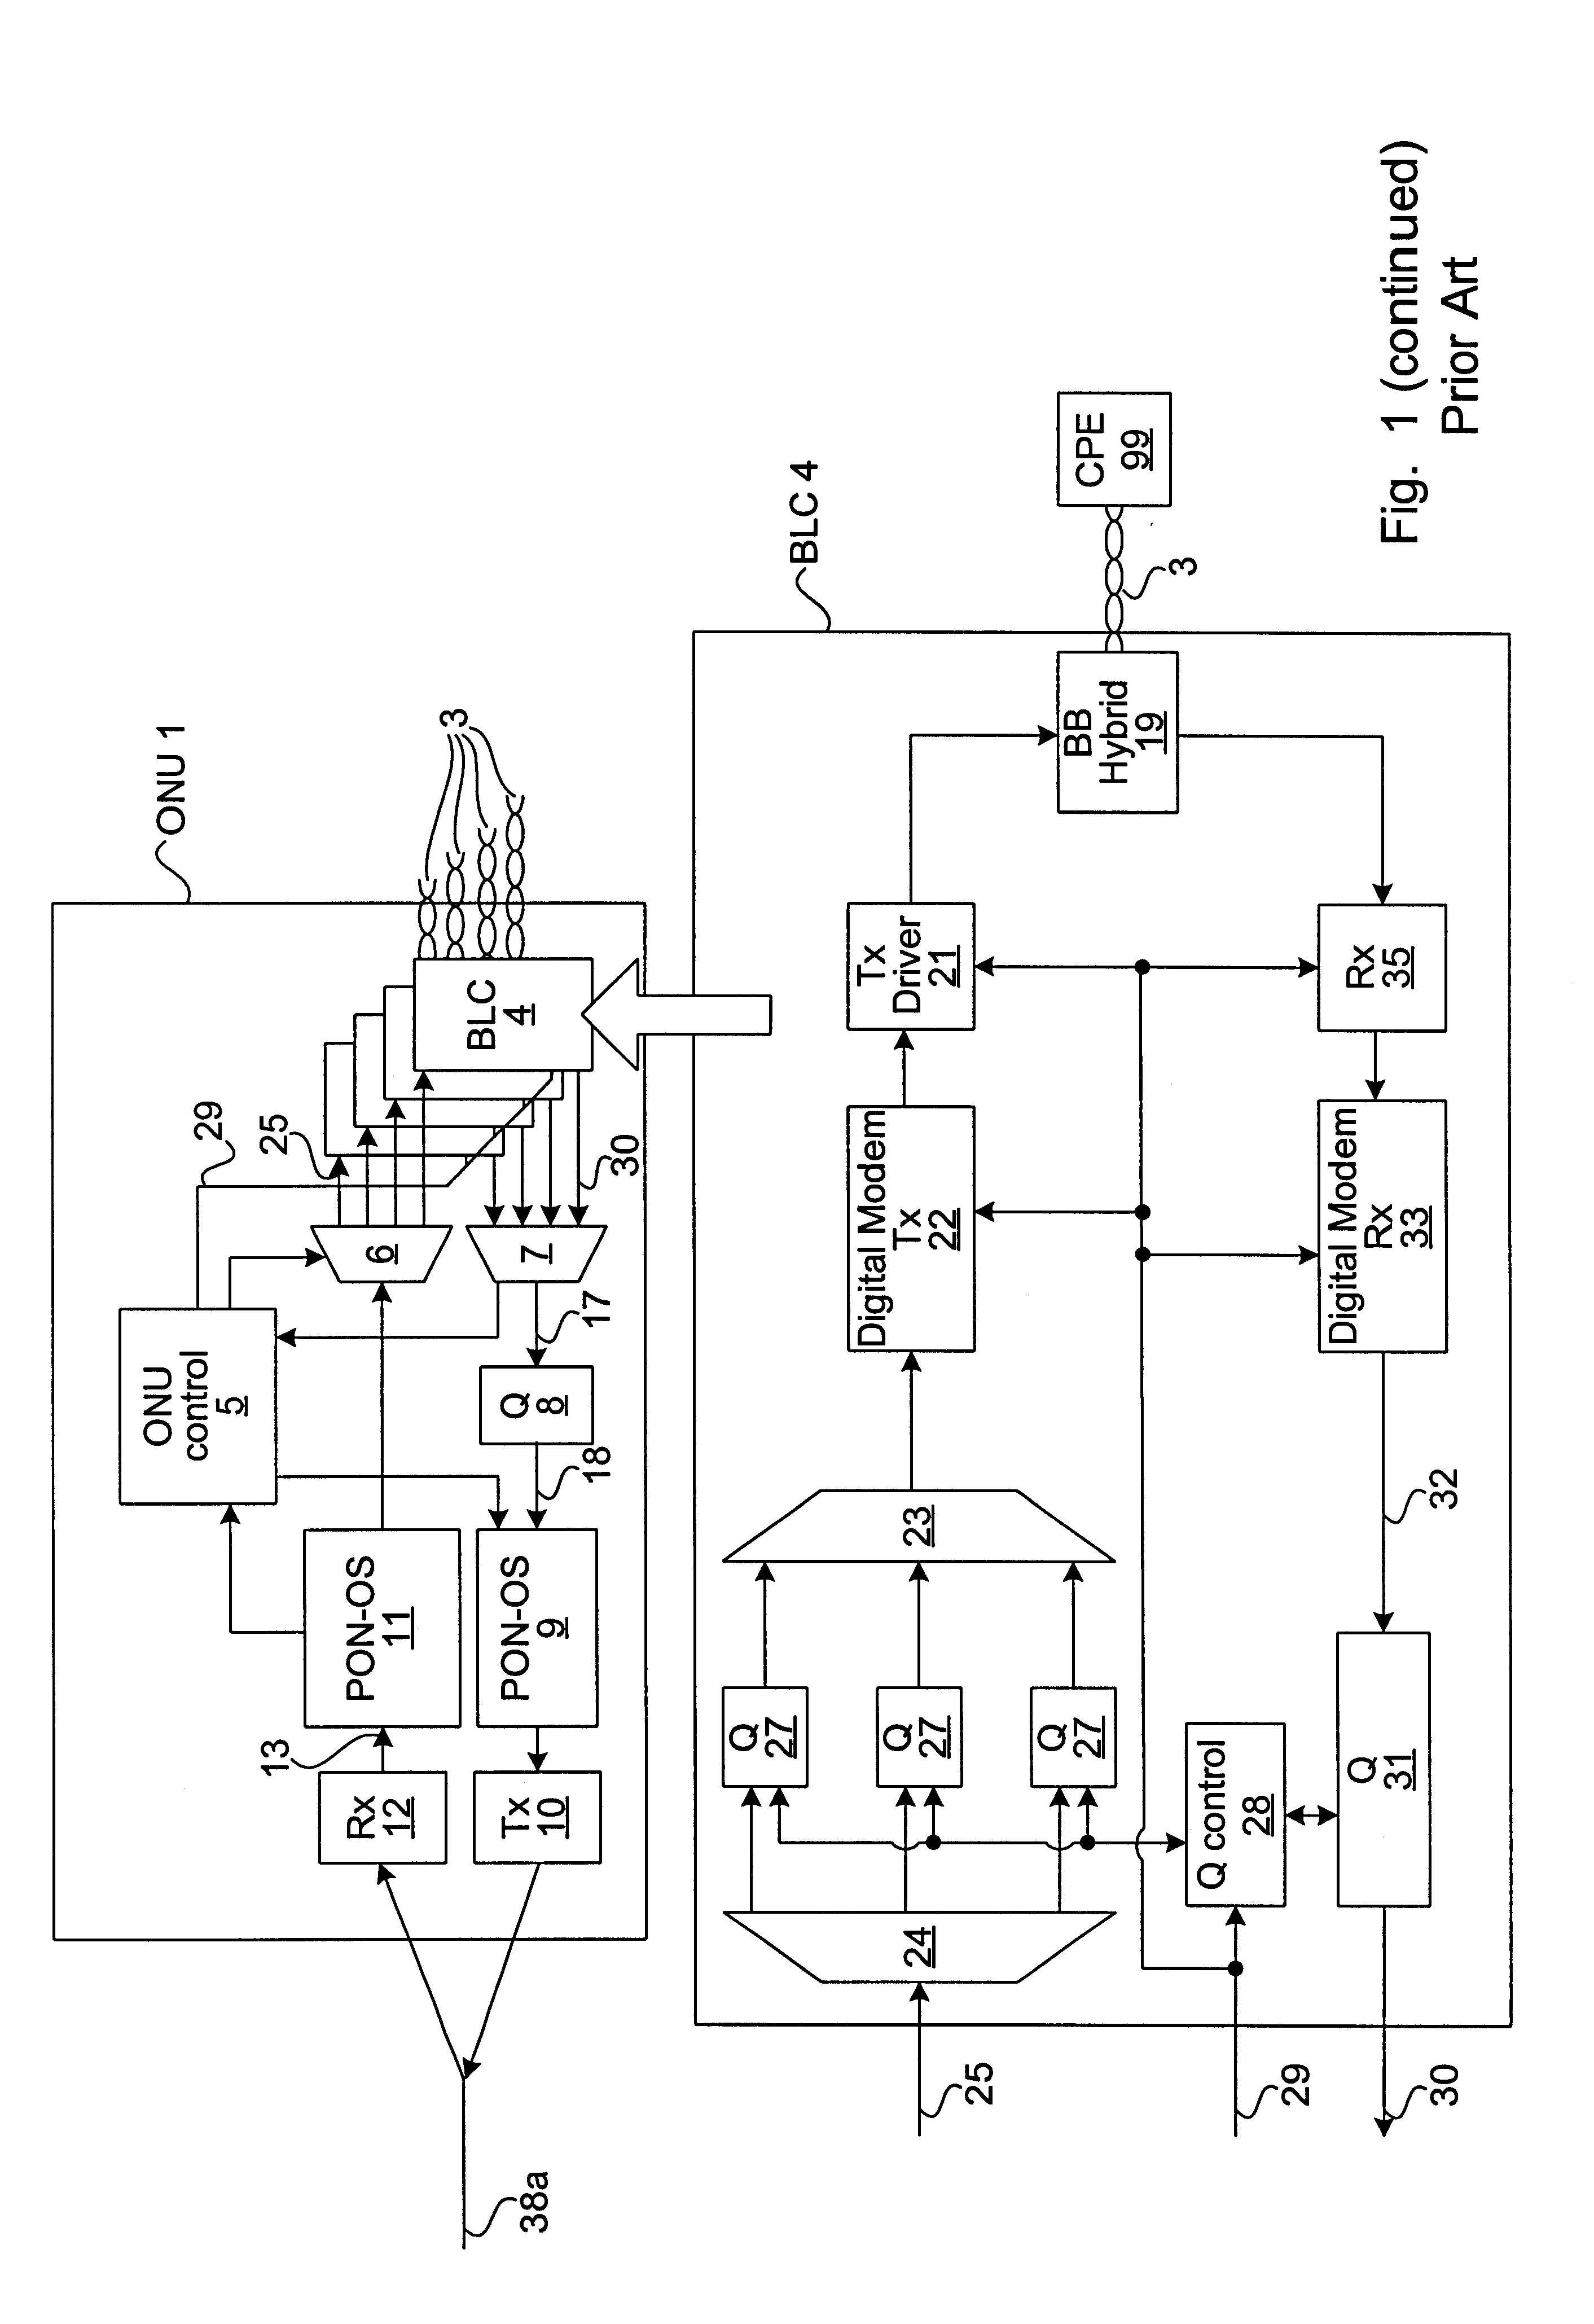 Method and apparatus for traffic shaping in a broadband fiber-based access system